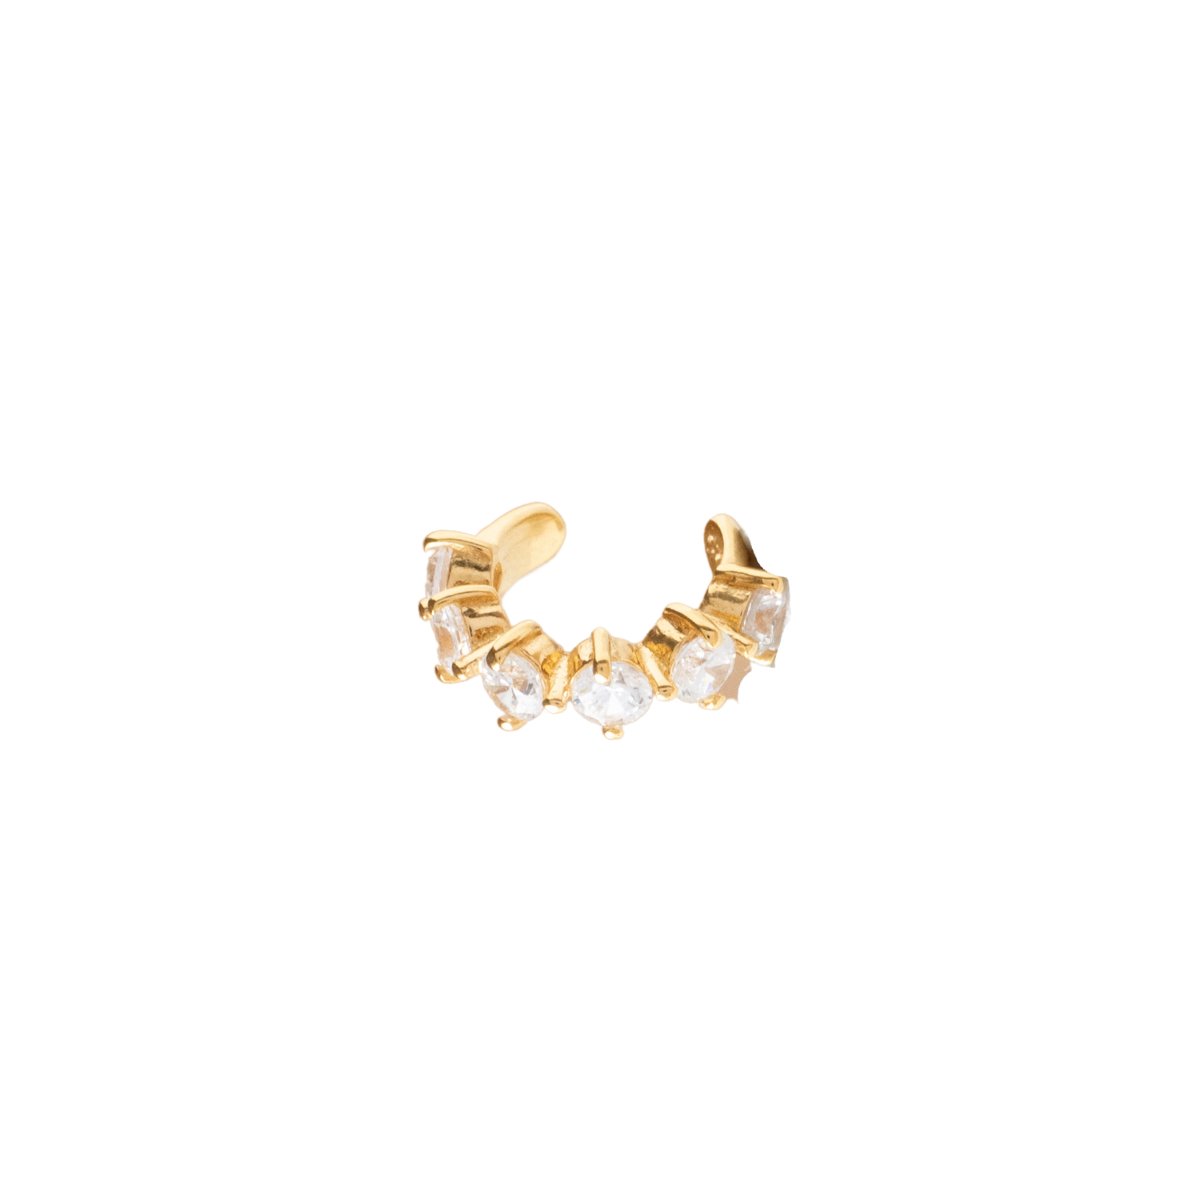 SCATTERED LOVE EAR CUFF - CUBIC ZIRCONIA &amp; GOLD - SO PRETTY CARA COTTER